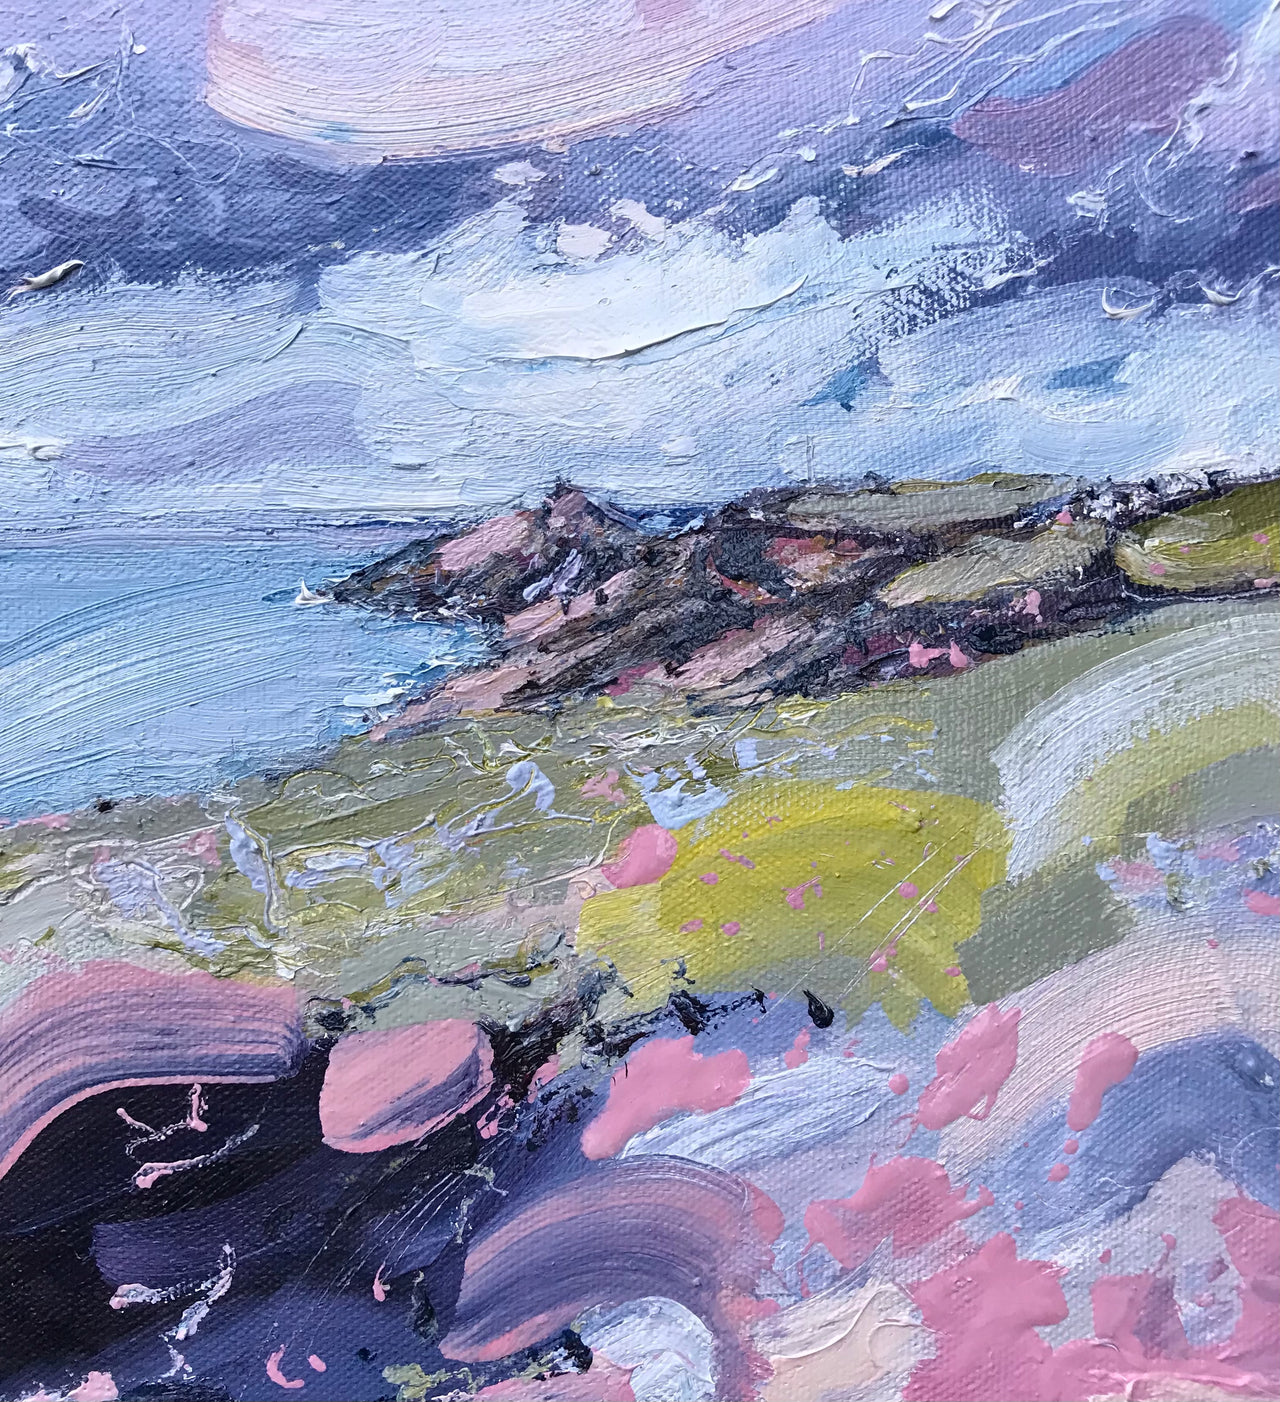 colourful Jill Hudson oil painting of Rame Head in south east Cornwall: the headland is green and pink under a blue and white sky and the foreground shows yellow and pink wildflowers 